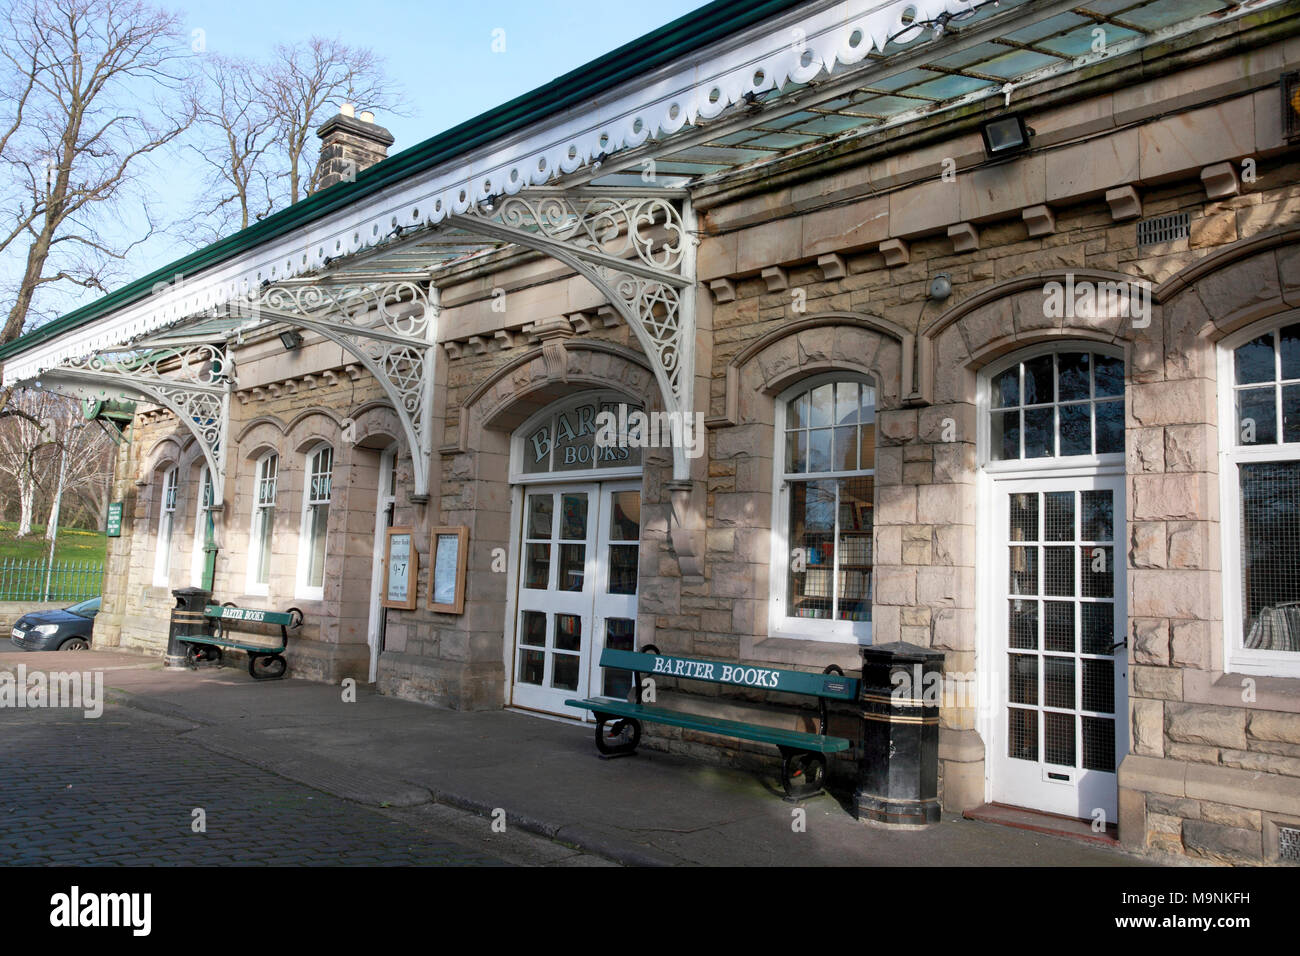 The entrance to Barter Books based in the old station in Alnwick, Northumberland Stock Photo